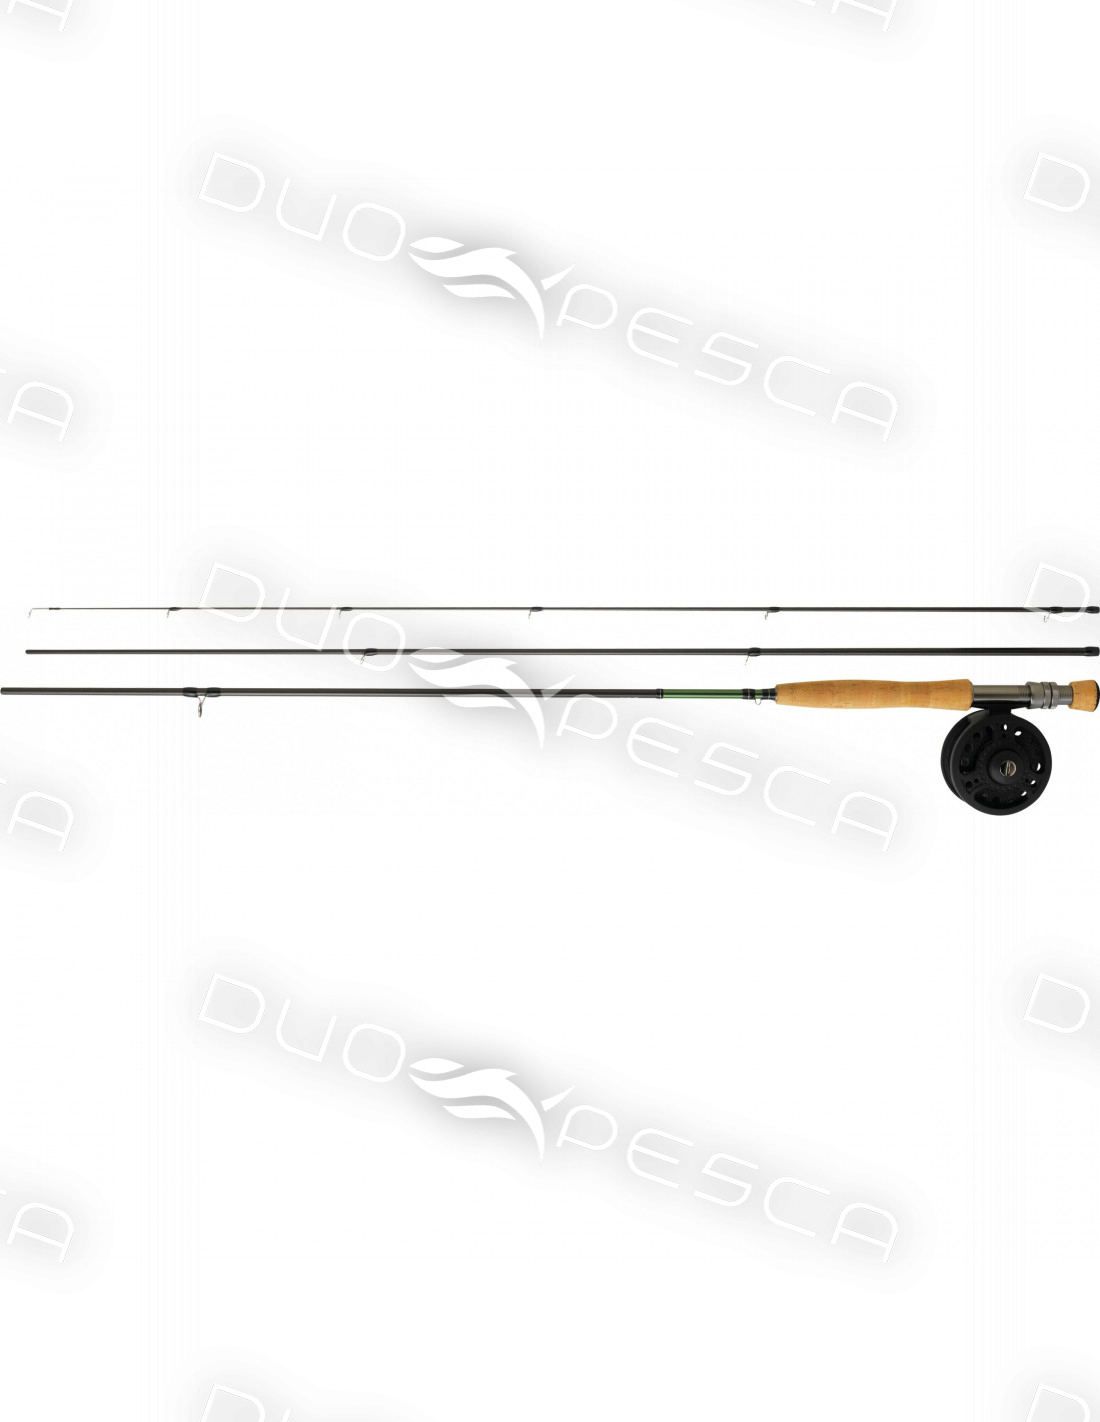 COMBO MOSCA DAIWA CARRETE MOSCA DF + CAÑA TROUT FLY CARBONO